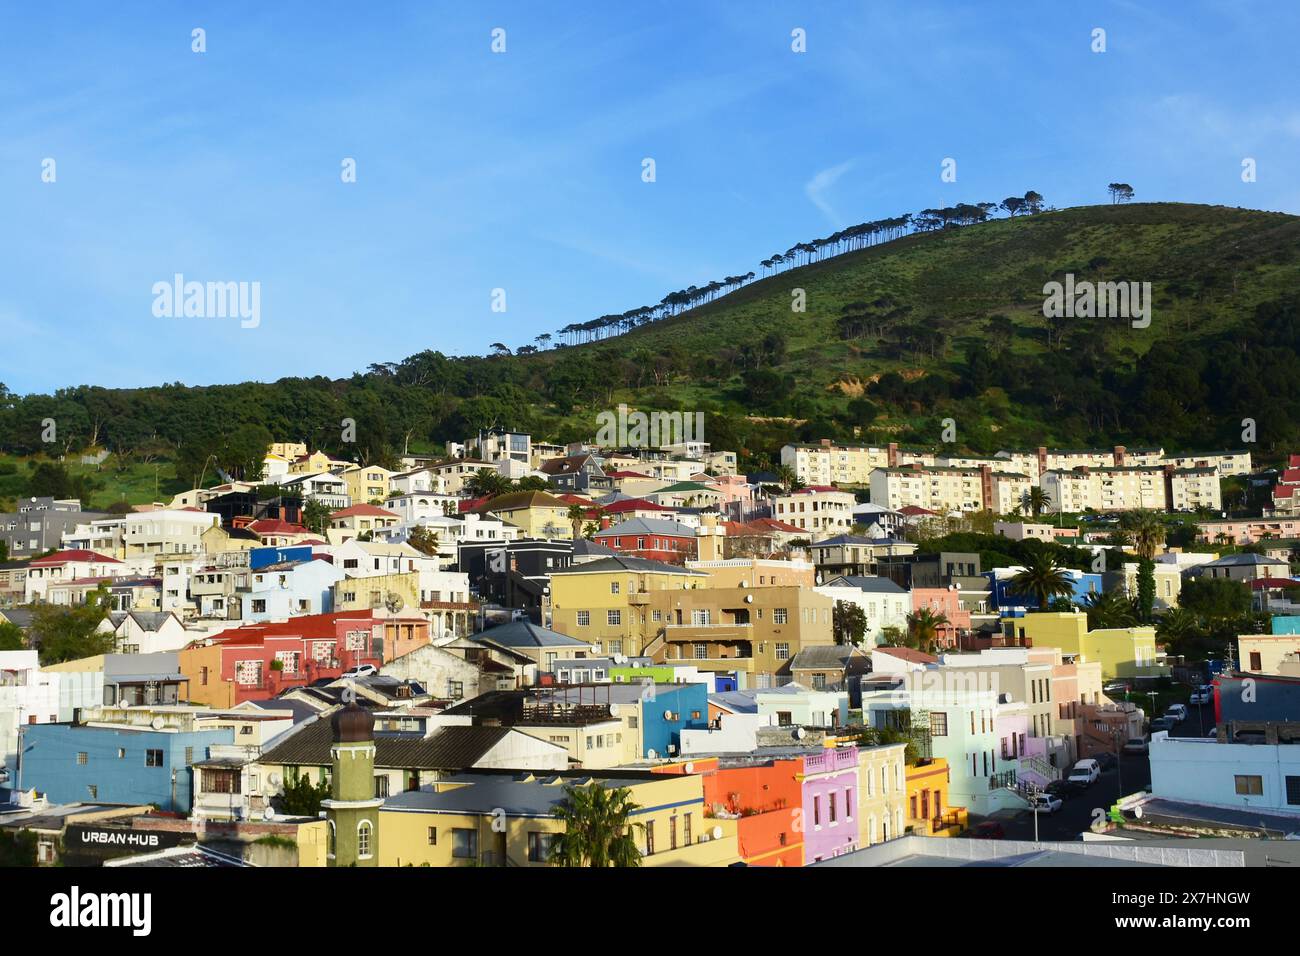 Colourful Houses, Bo-Kaap, Cape Town, Western Cape, South Africa Stock Photo